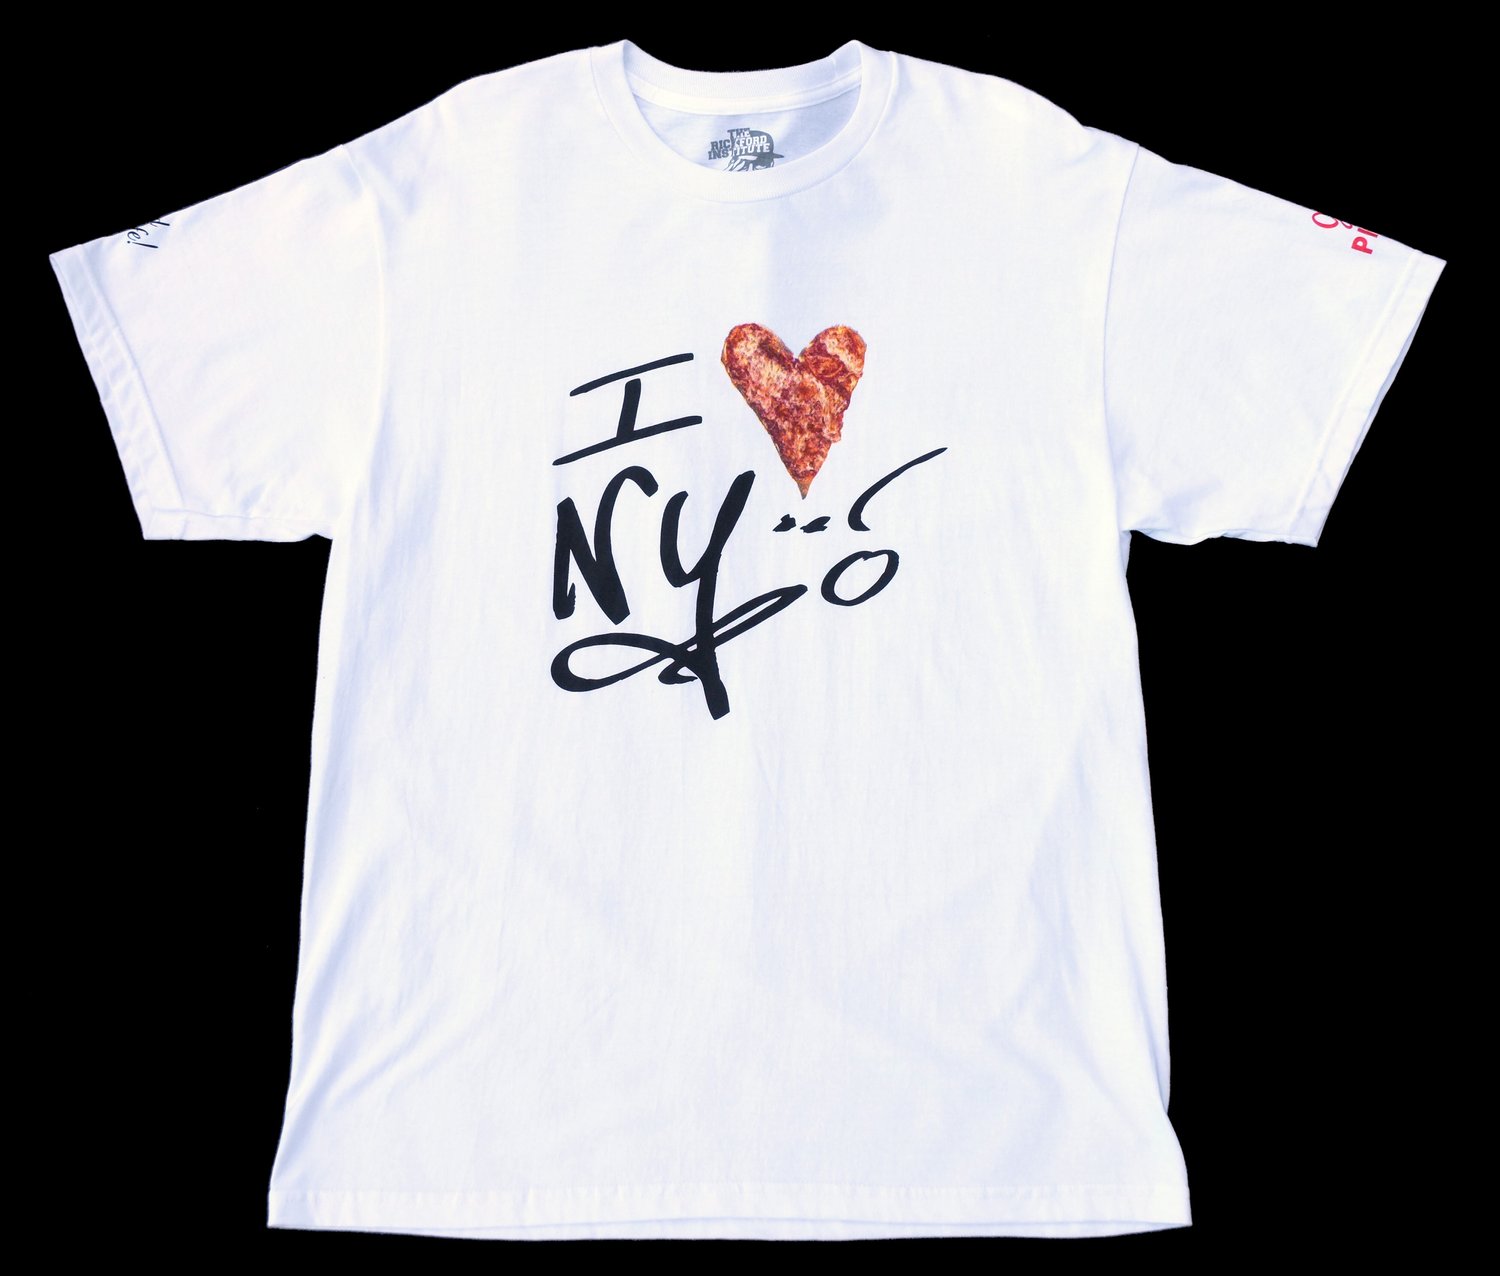 WHITE/MED TheGoodLife! X Joes's Pizza X Ricky Powell Collab T